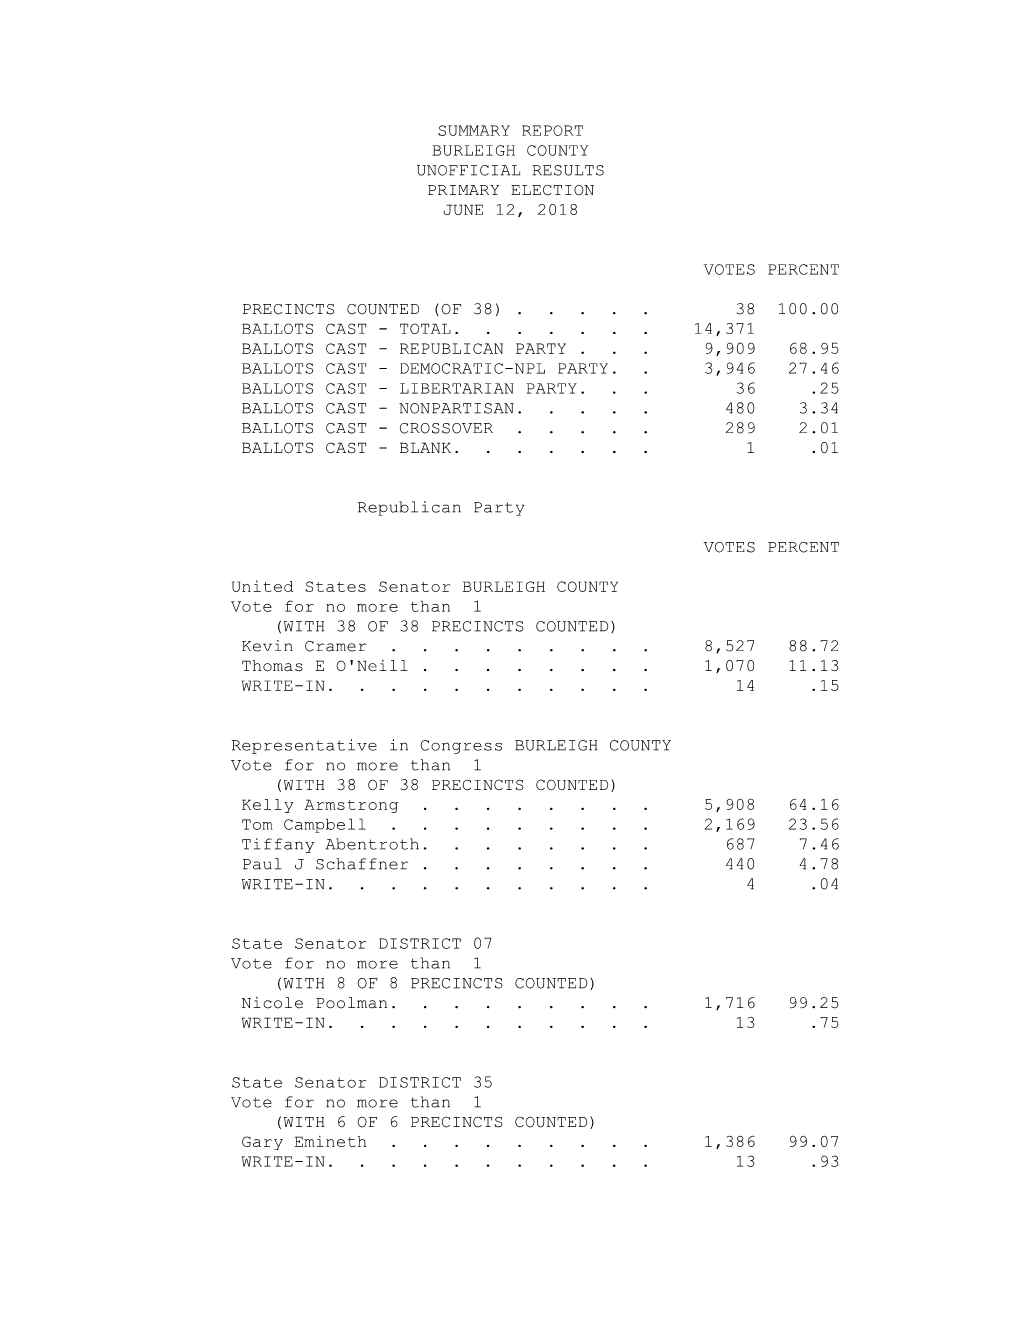 Summary Report Burleigh County Unofficial Results Primary Election June 12, 2018